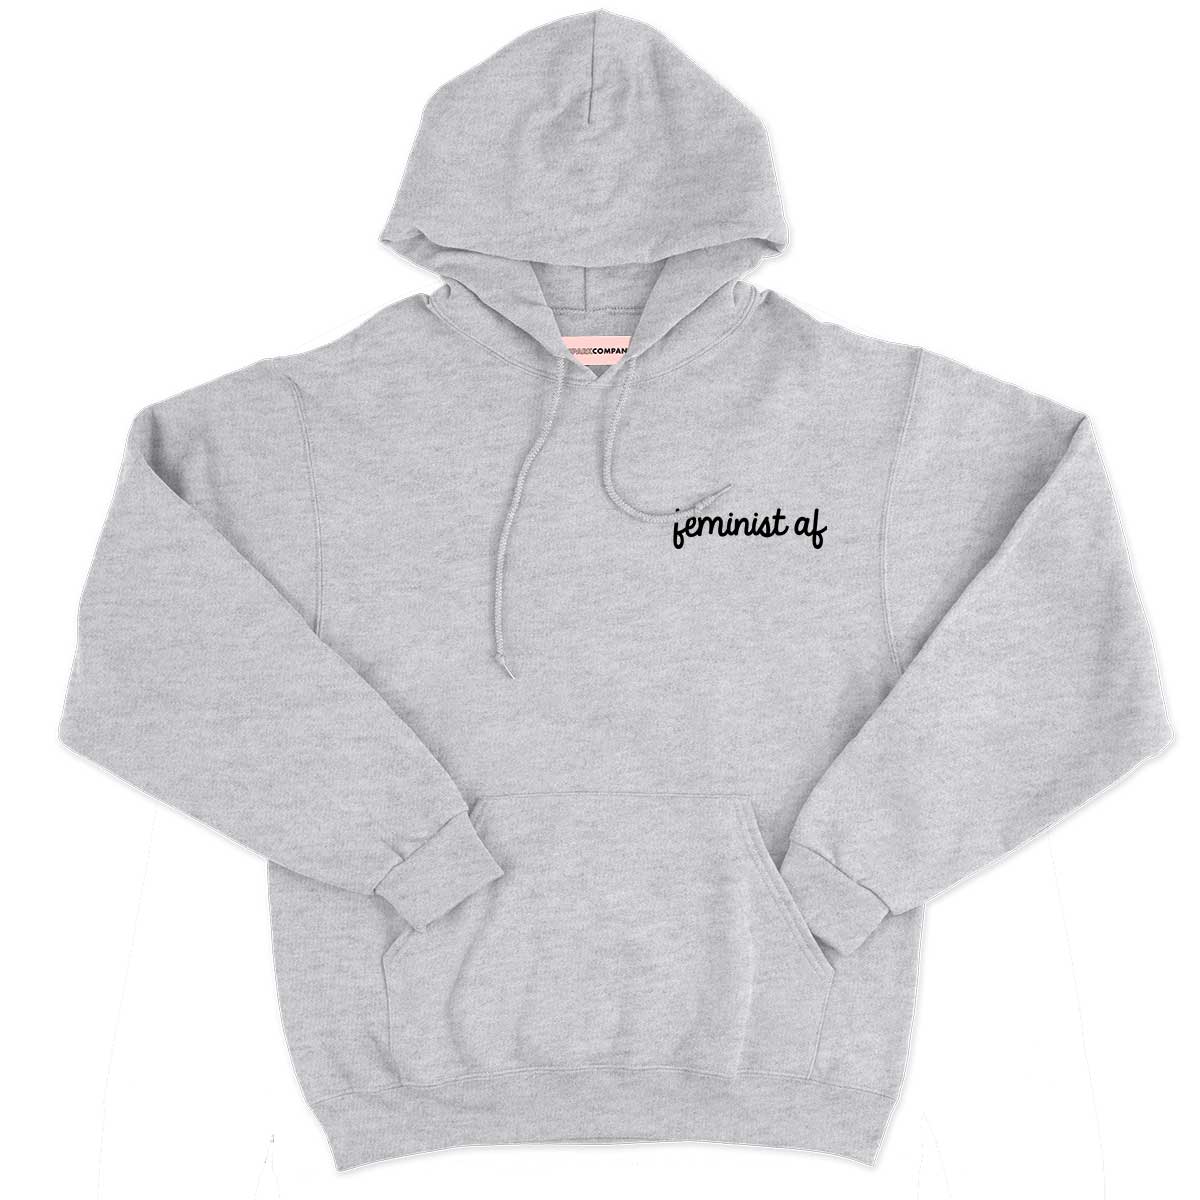 Feminist AF Embroidered Hoodie | The Spark Company